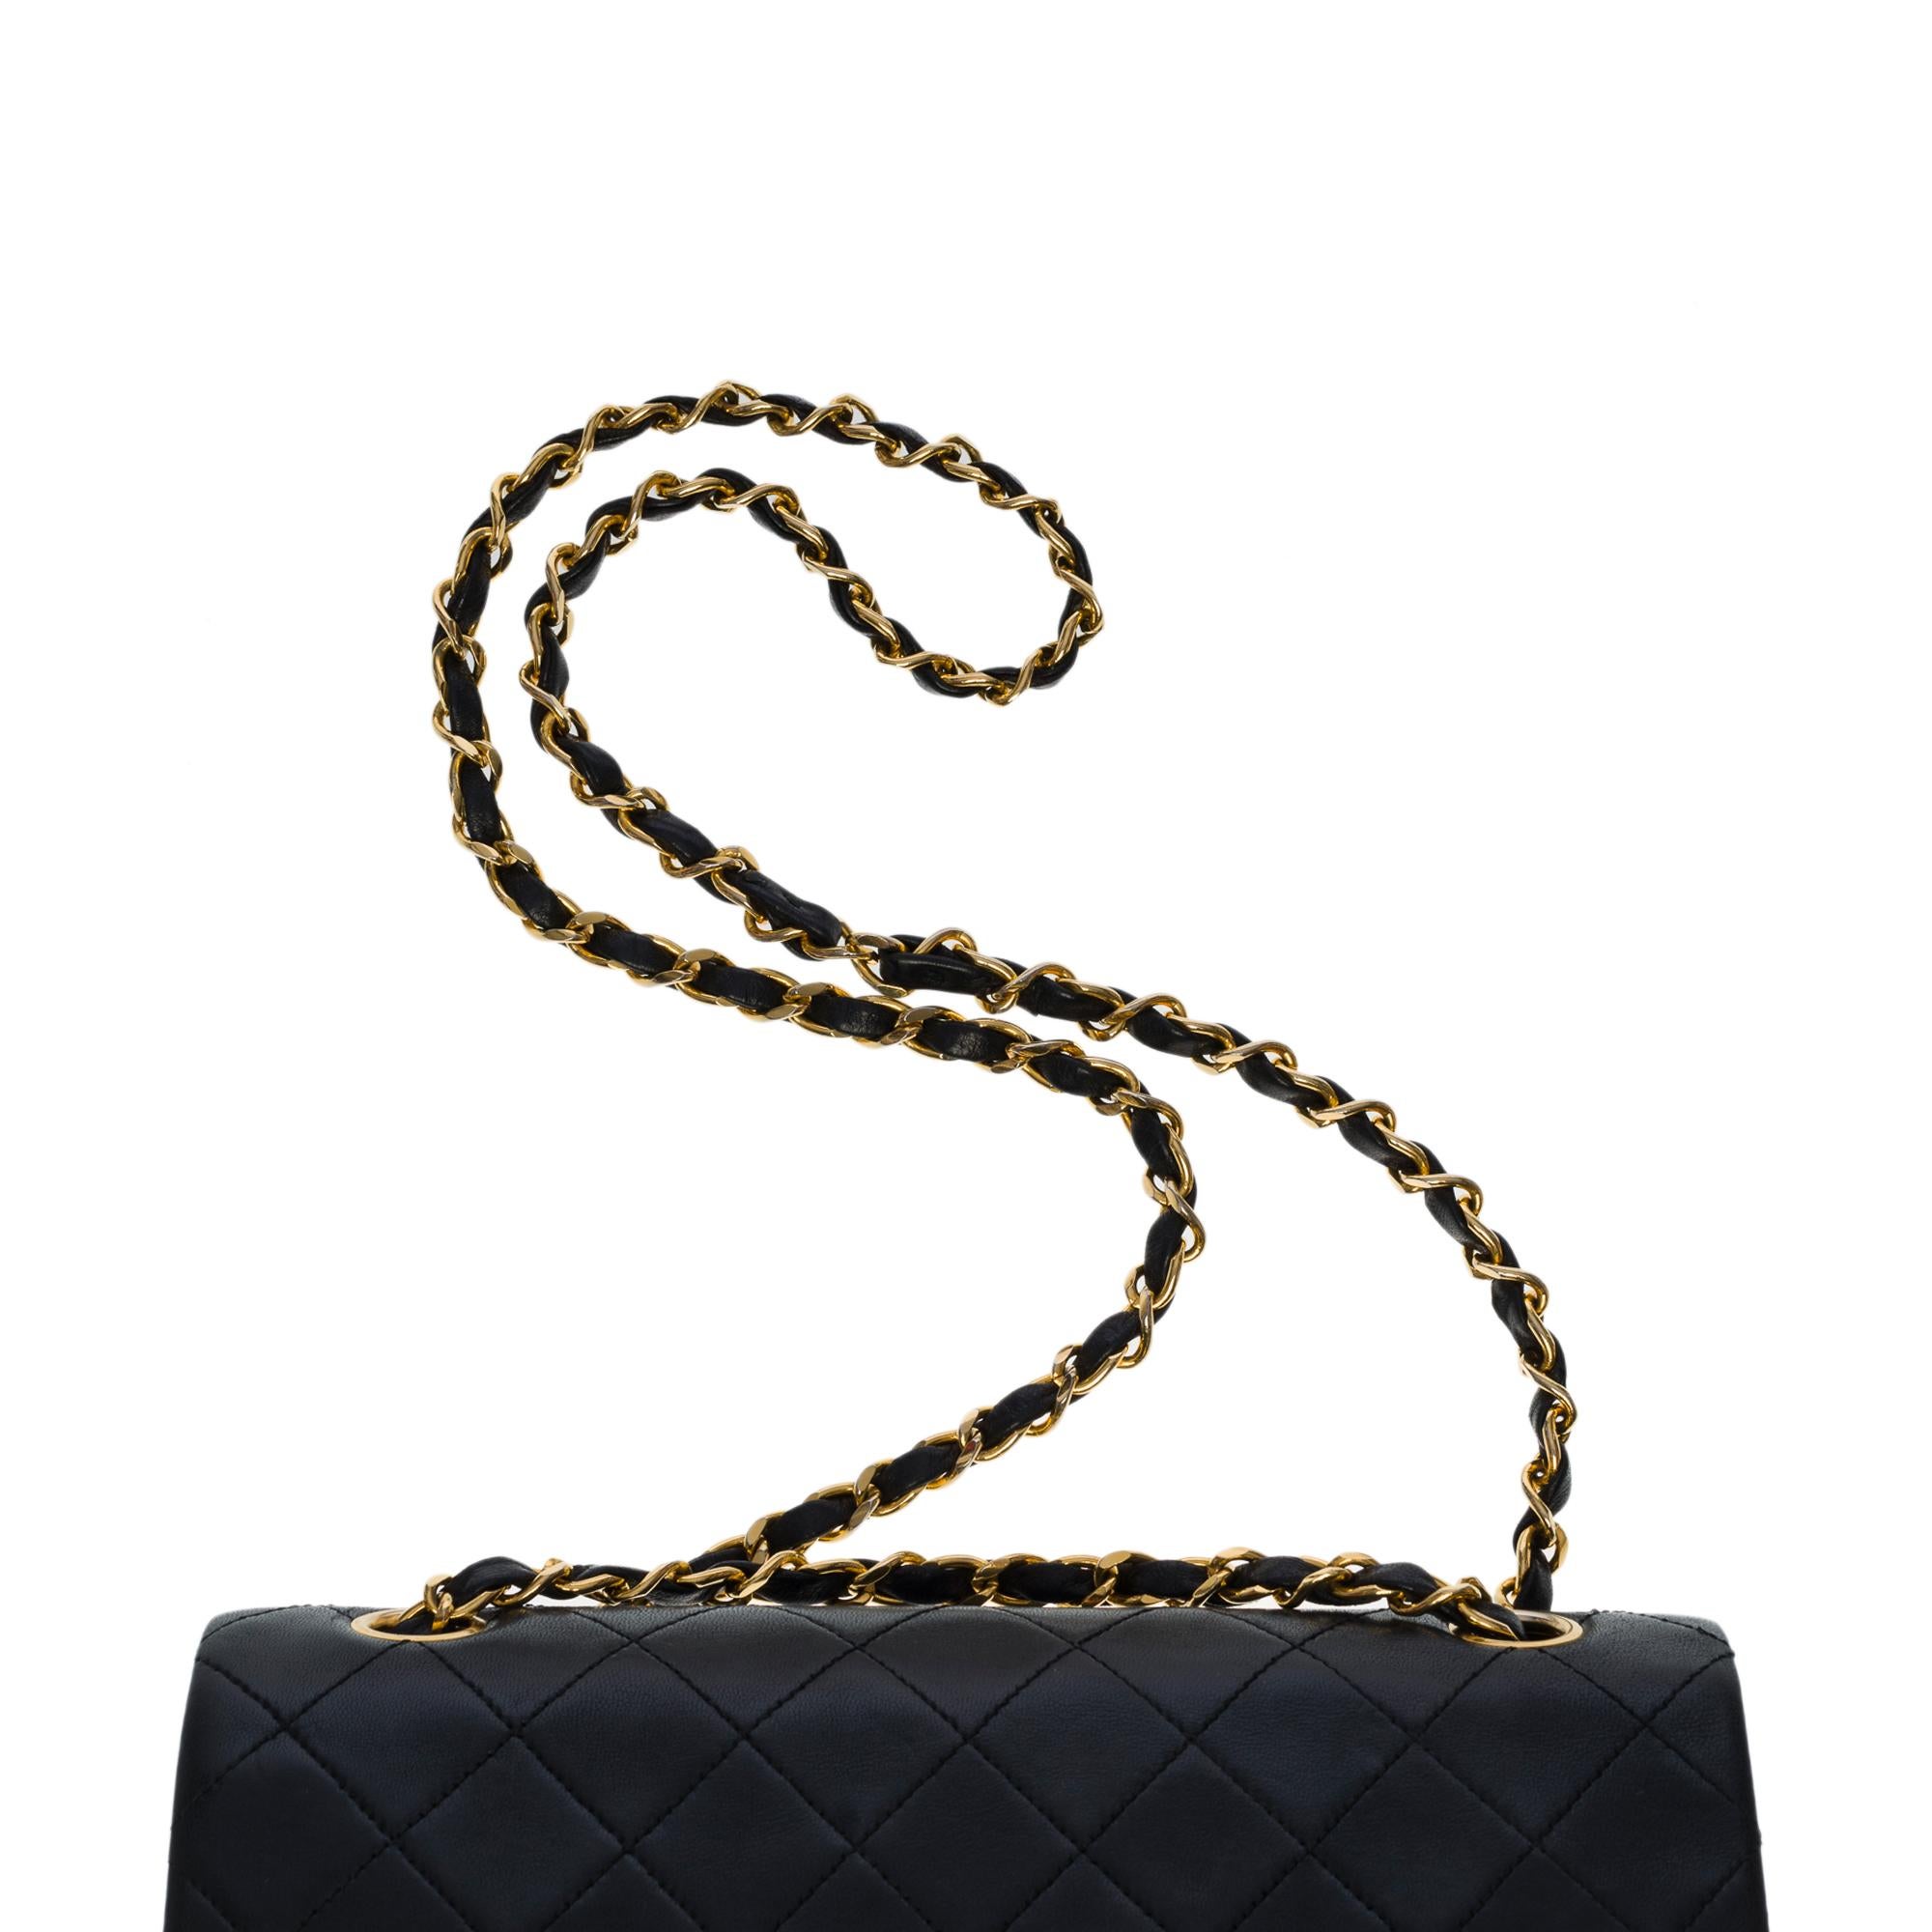 Women's Chanel Coco Timeless 23cm double flap shoulder bag in black quilted lambskin, GHW